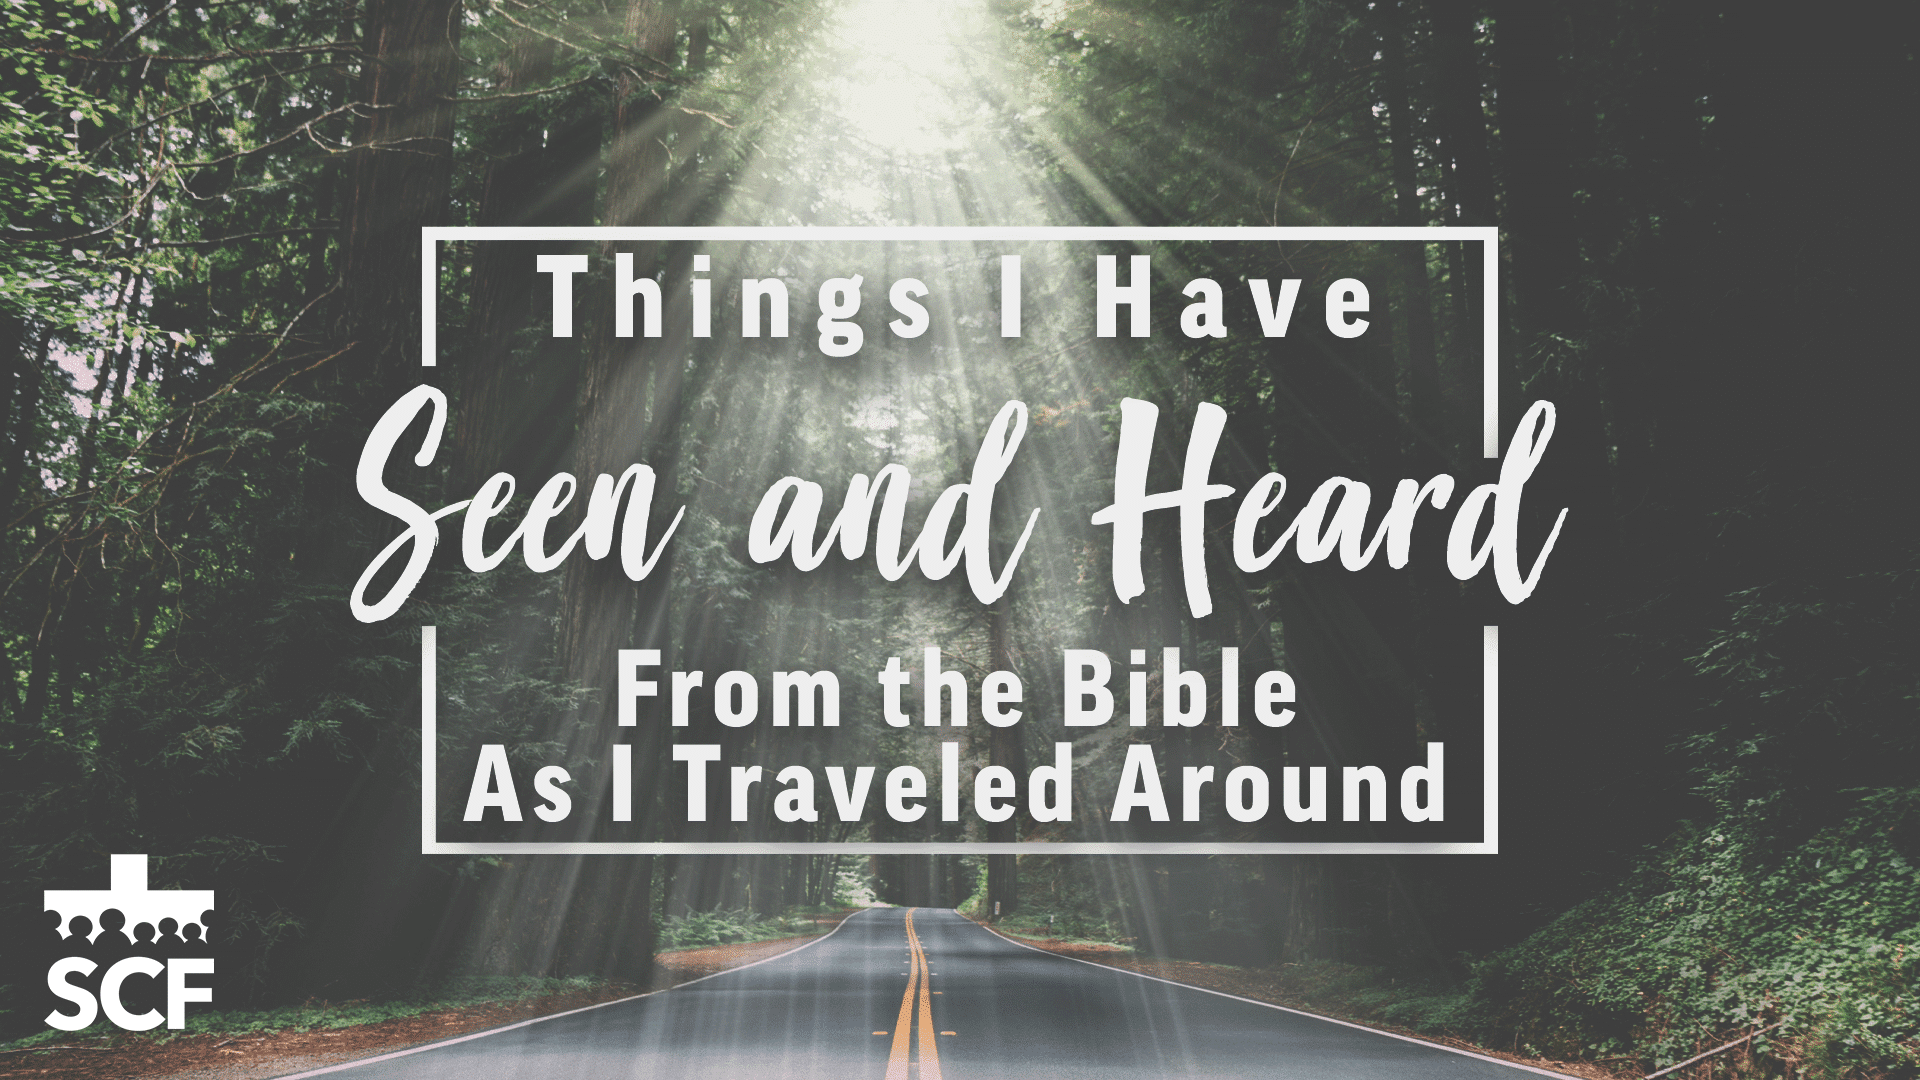 Things I Have Seen and Heard From the Bible as I Traveled Around